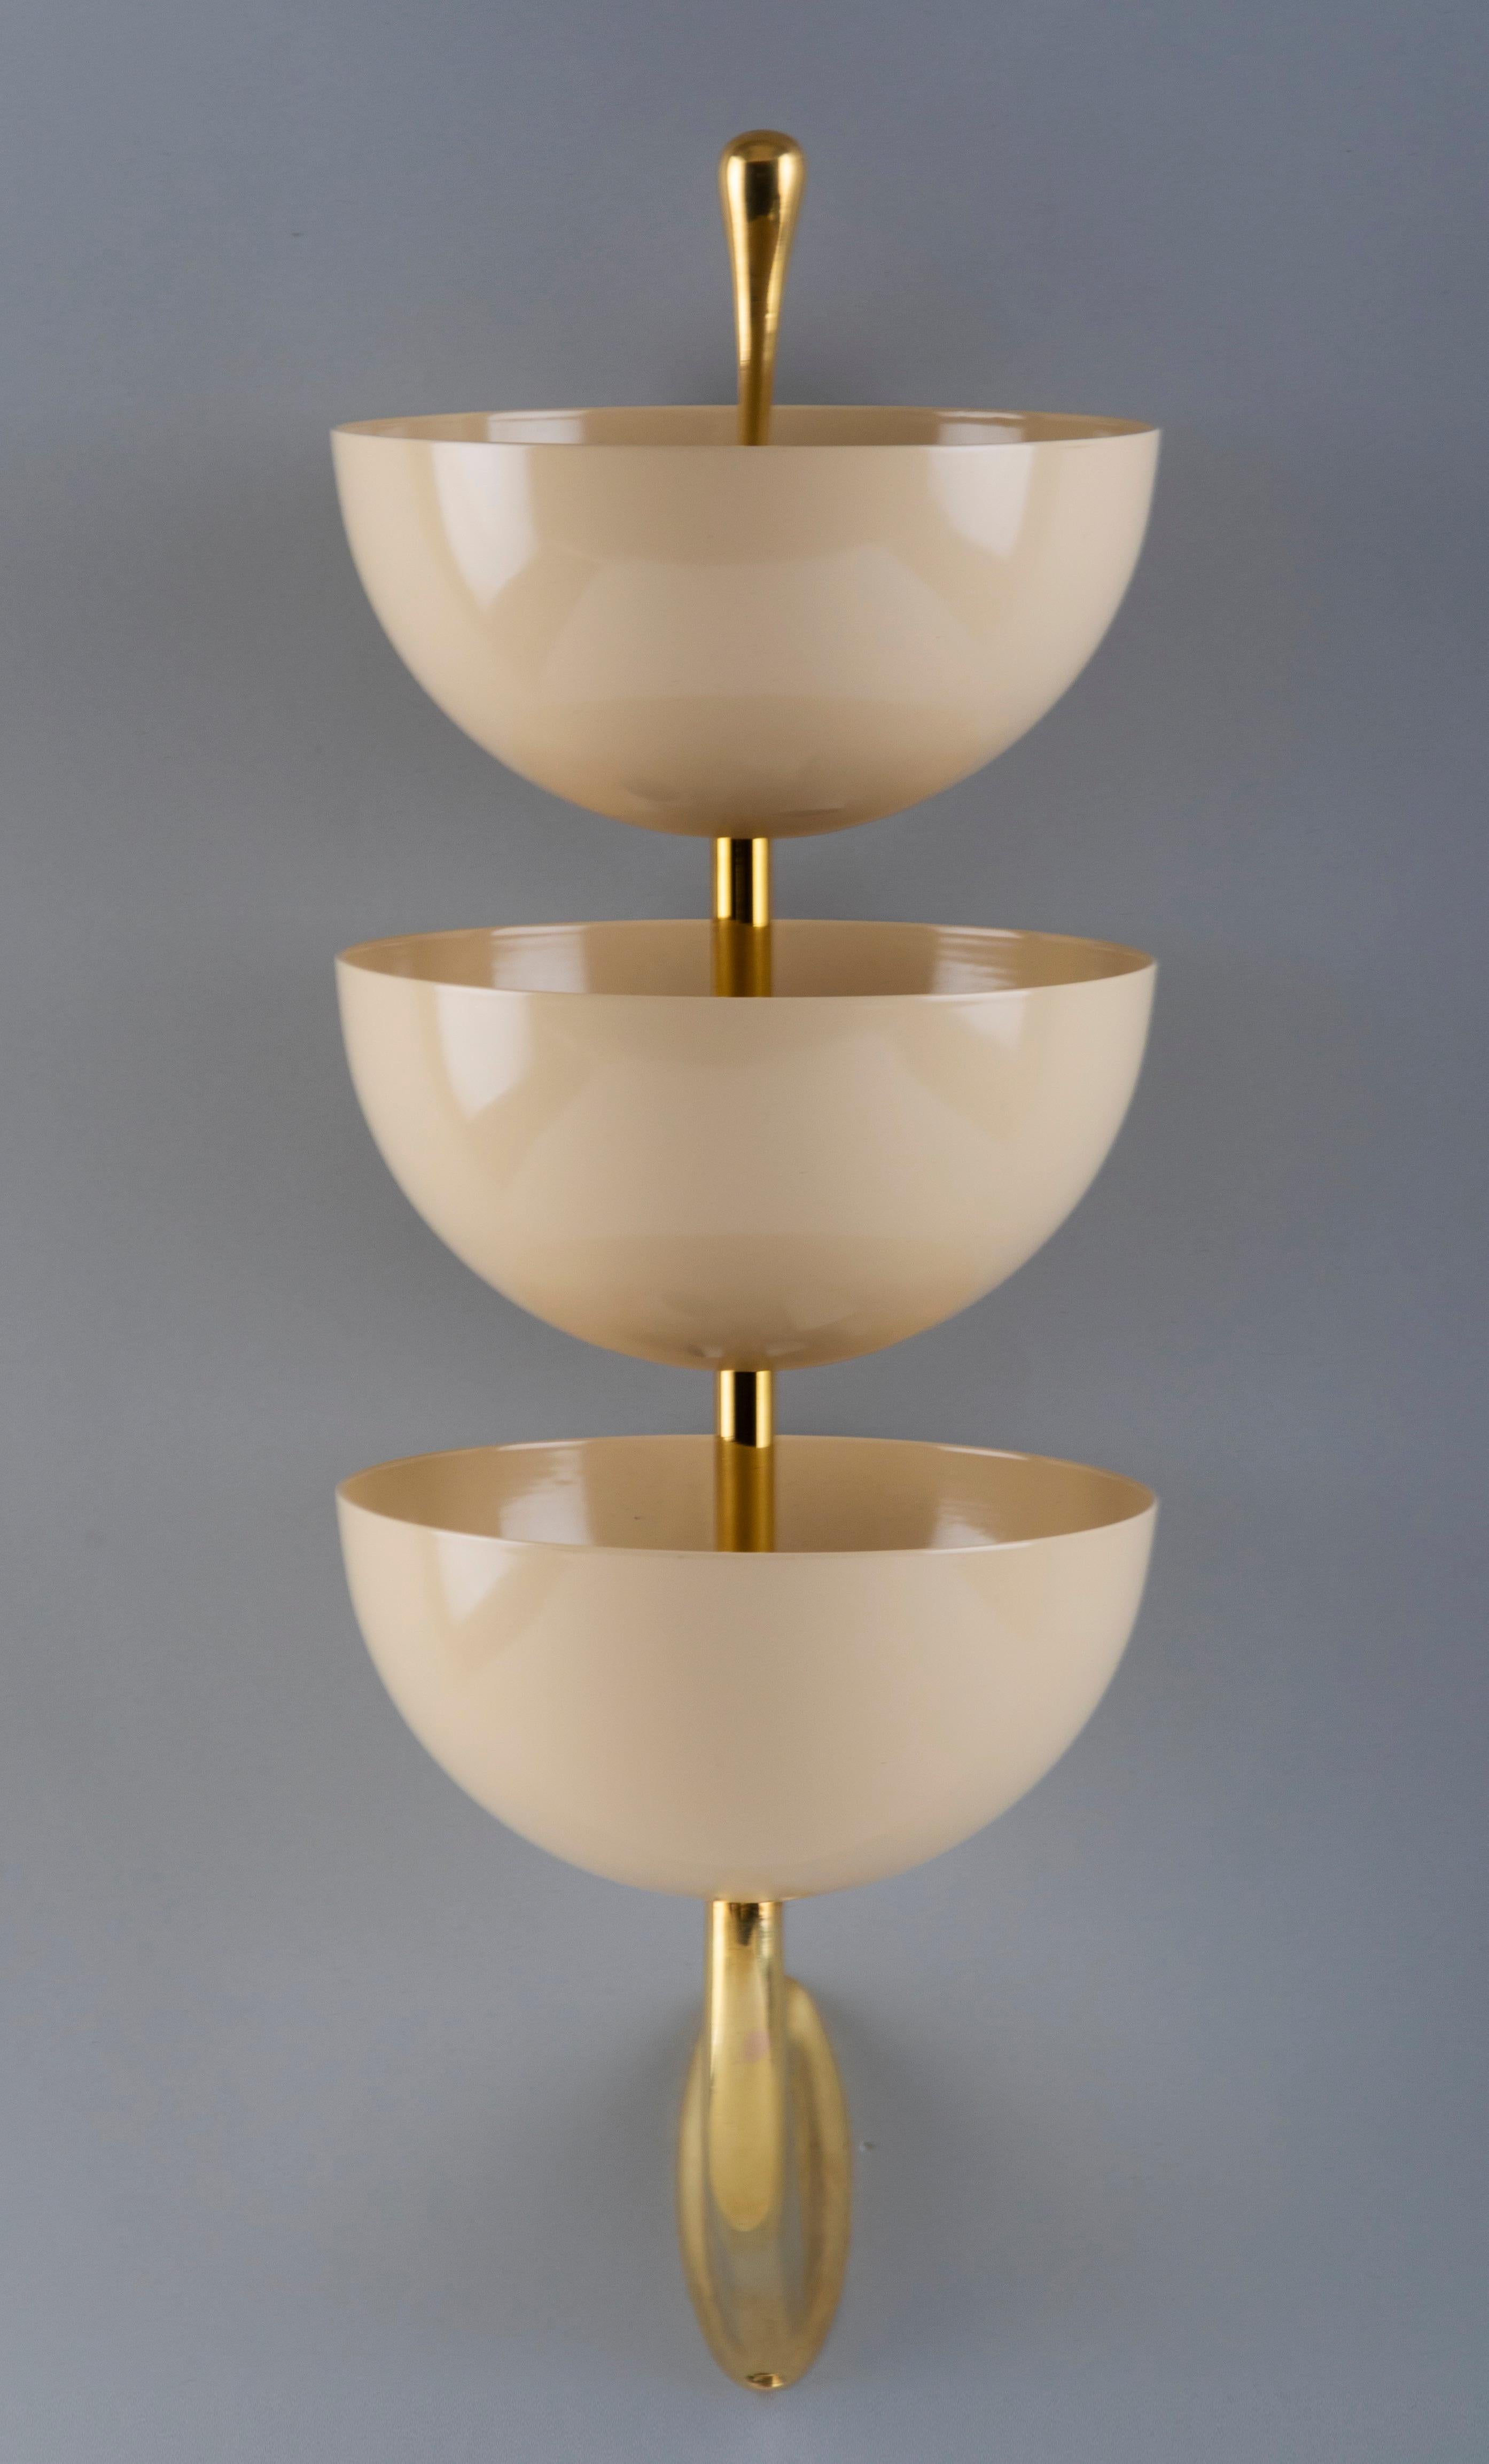 Exquisite Pair of Tiered White Enamel and Brass Sconces by Stilnovo, Italy 1950s 1